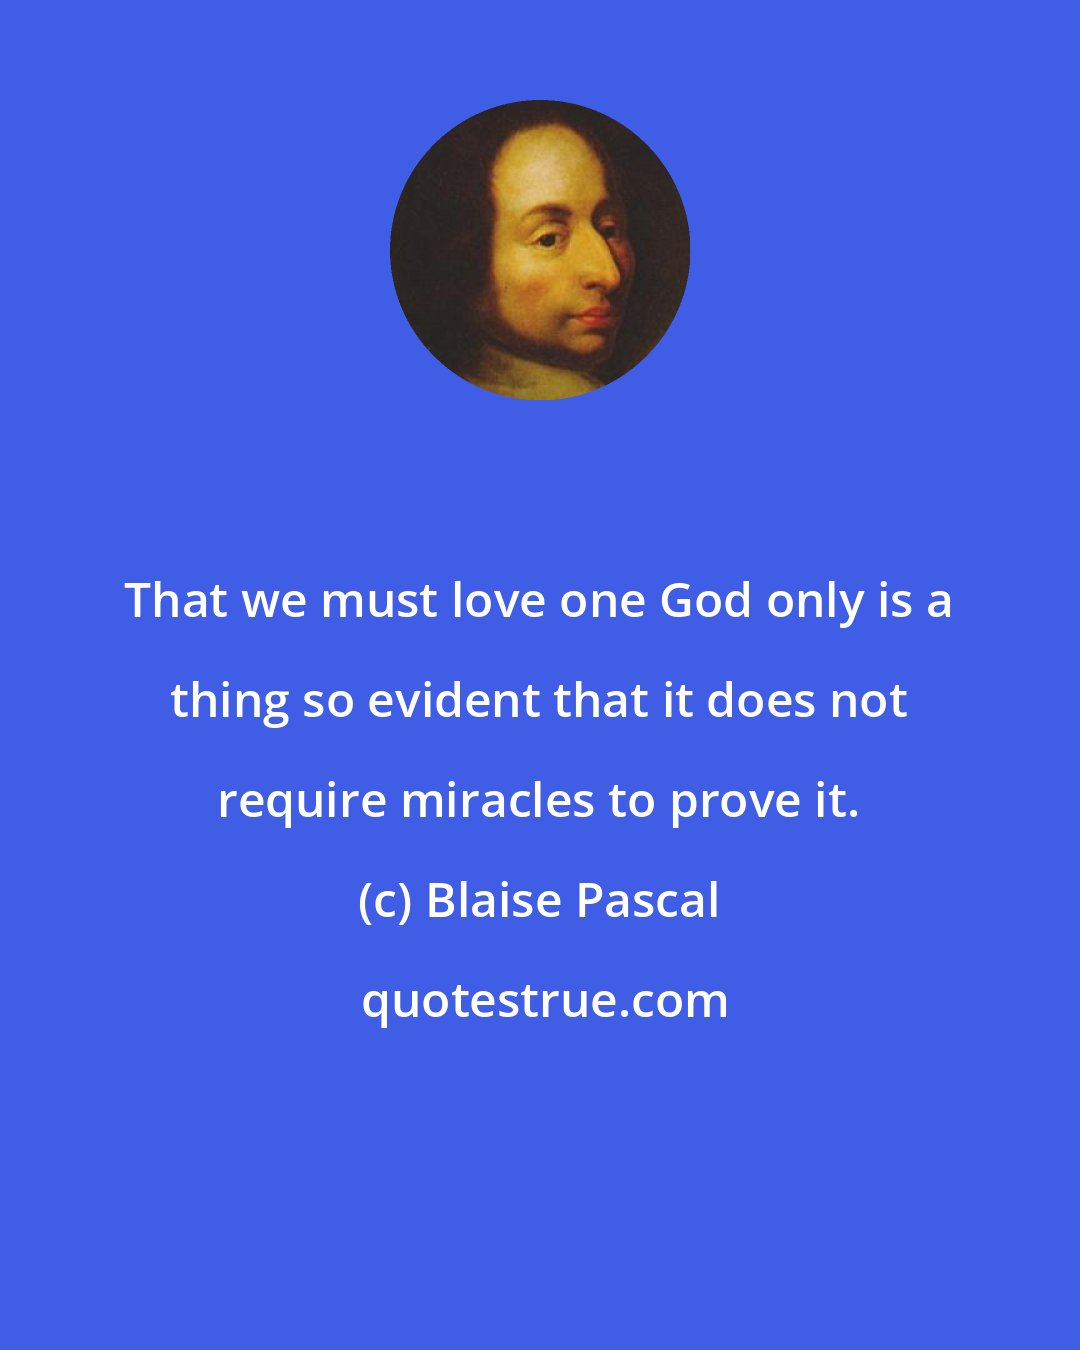 Blaise Pascal: That we must love one God only is a thing so evident that it does not require miracles to prove it.